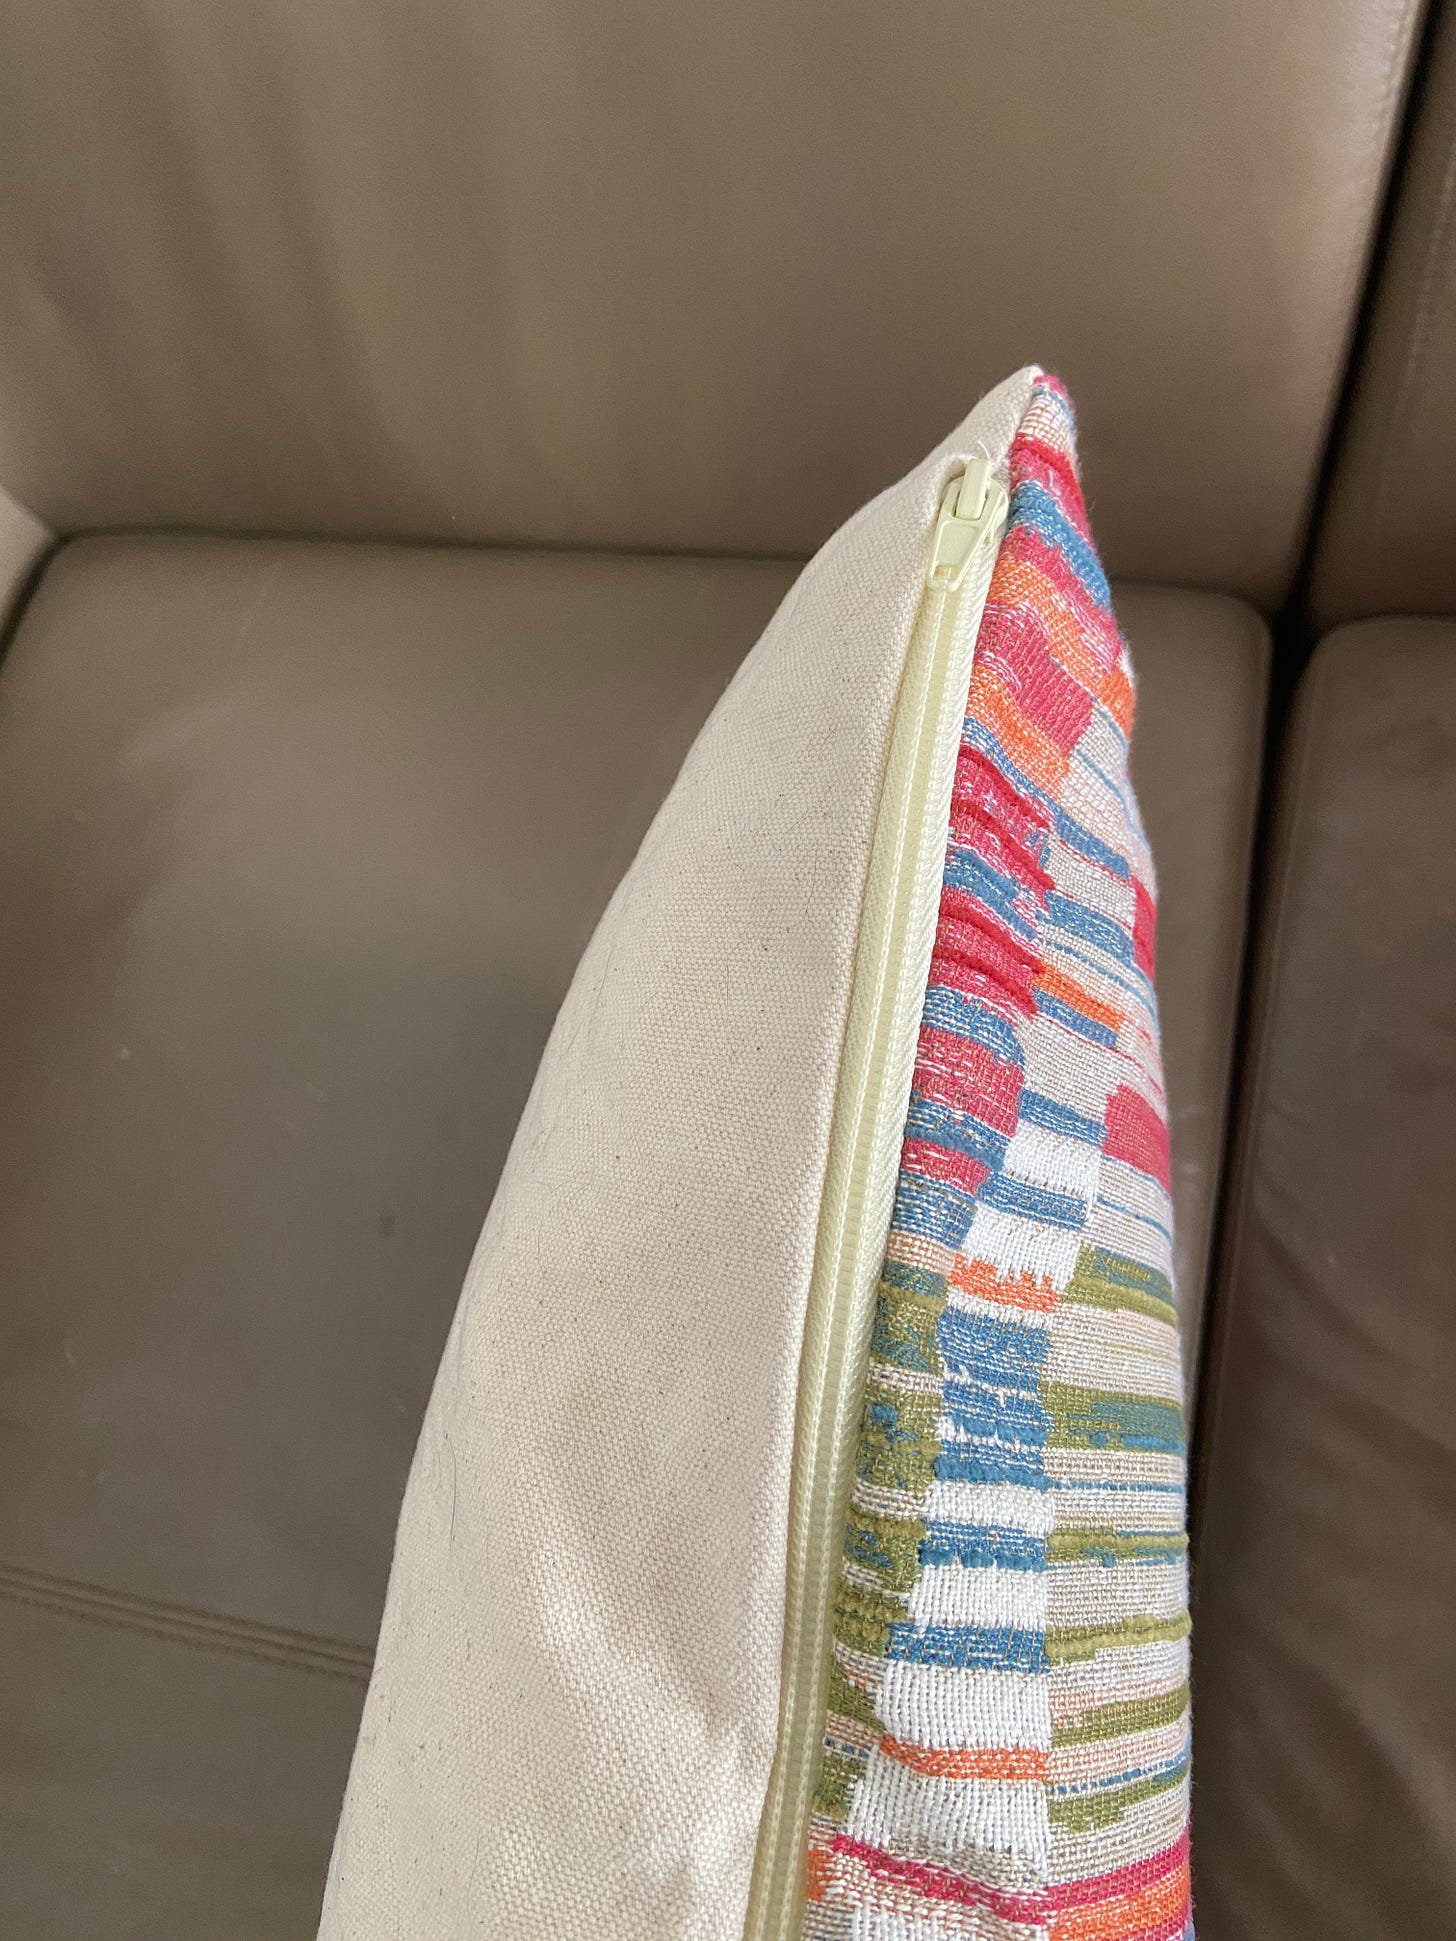 A side view of the pillow, showing the patterned face and the canvas backing, bisected by an off white zipper.